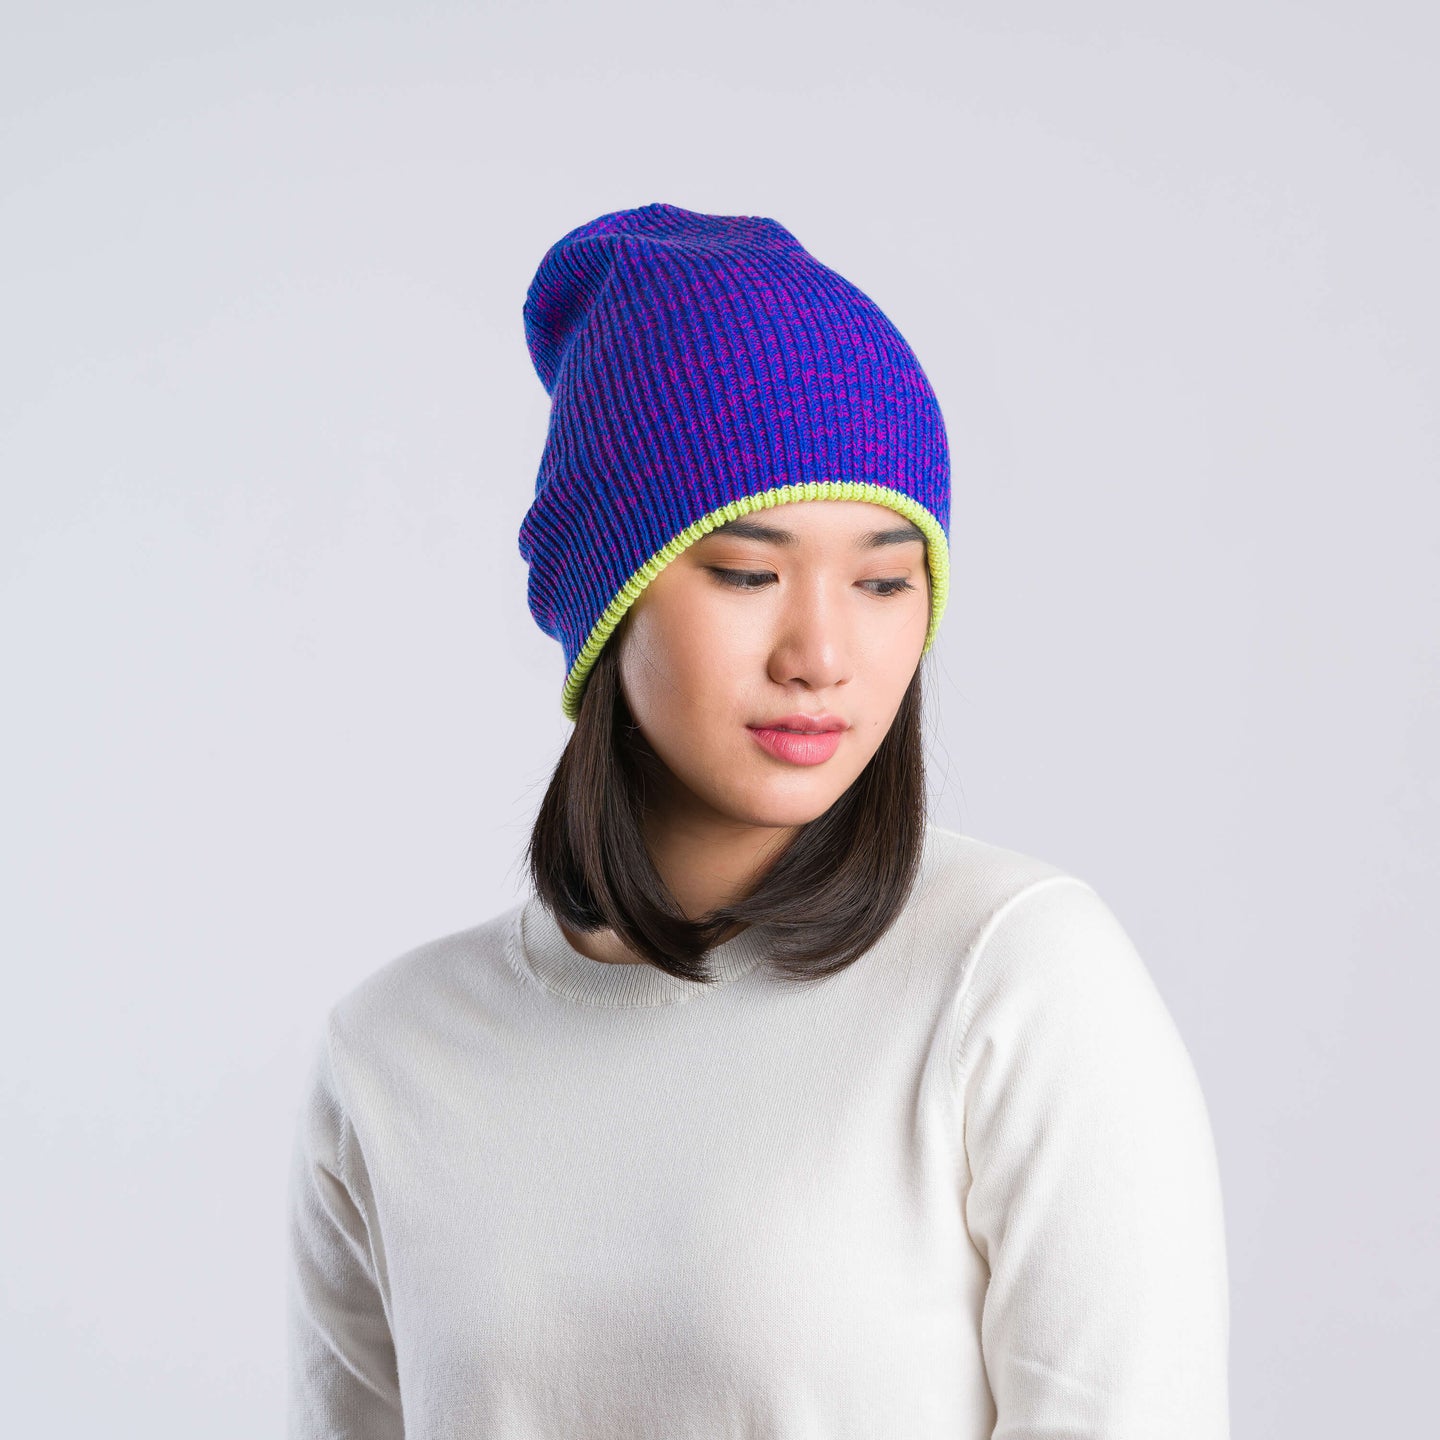 Ribbed Reversible Knit Winter Beanie Slouchy Hat